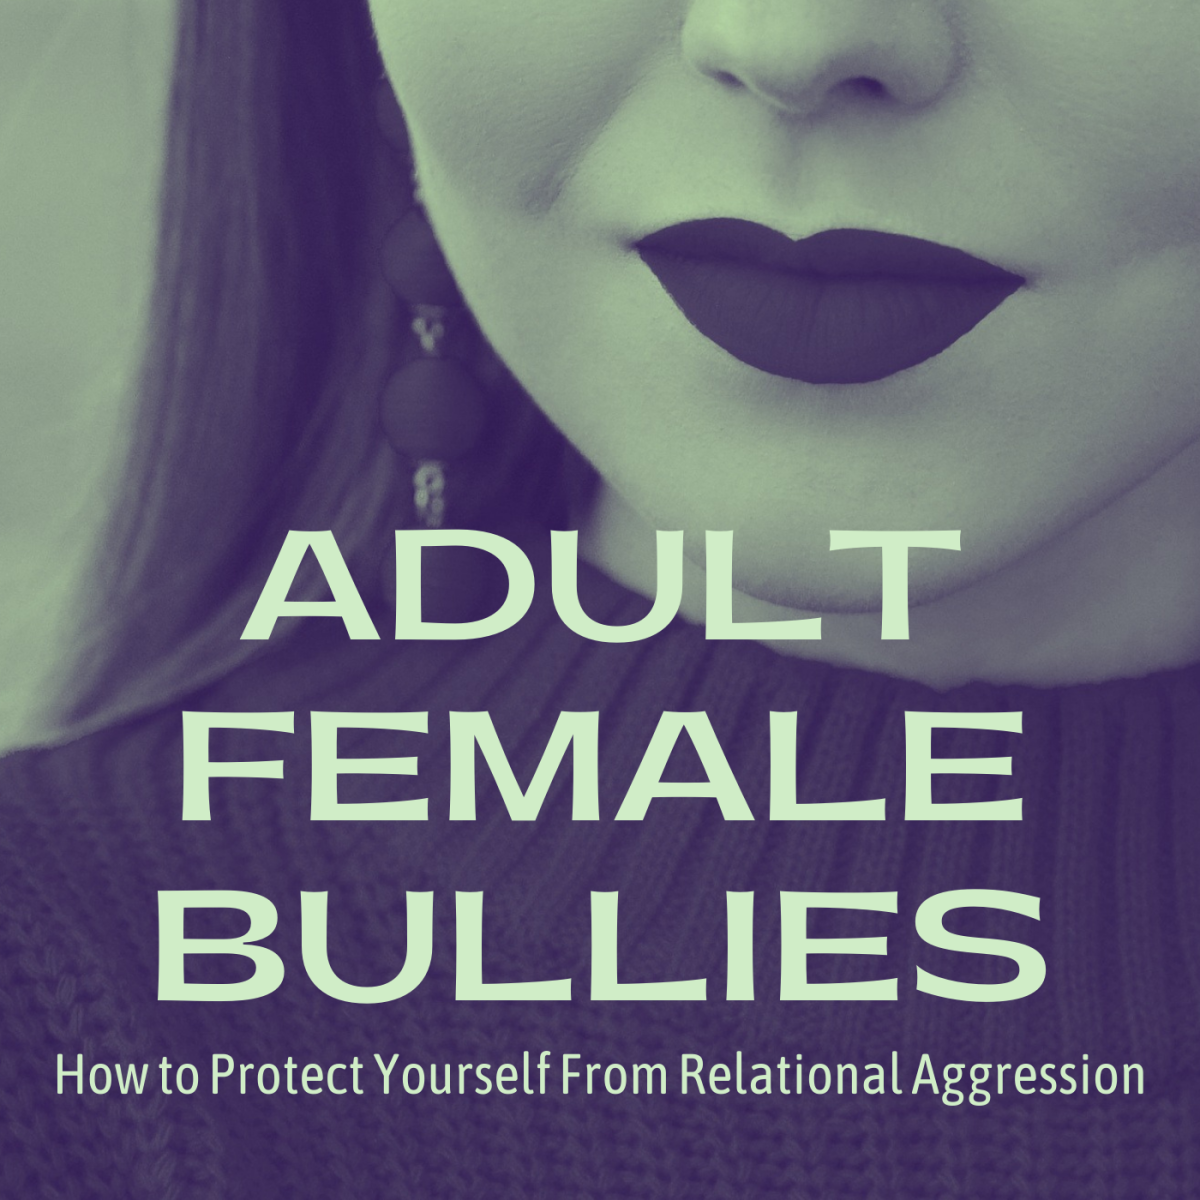 Mean Women: Female Bullies and Relational Aggression